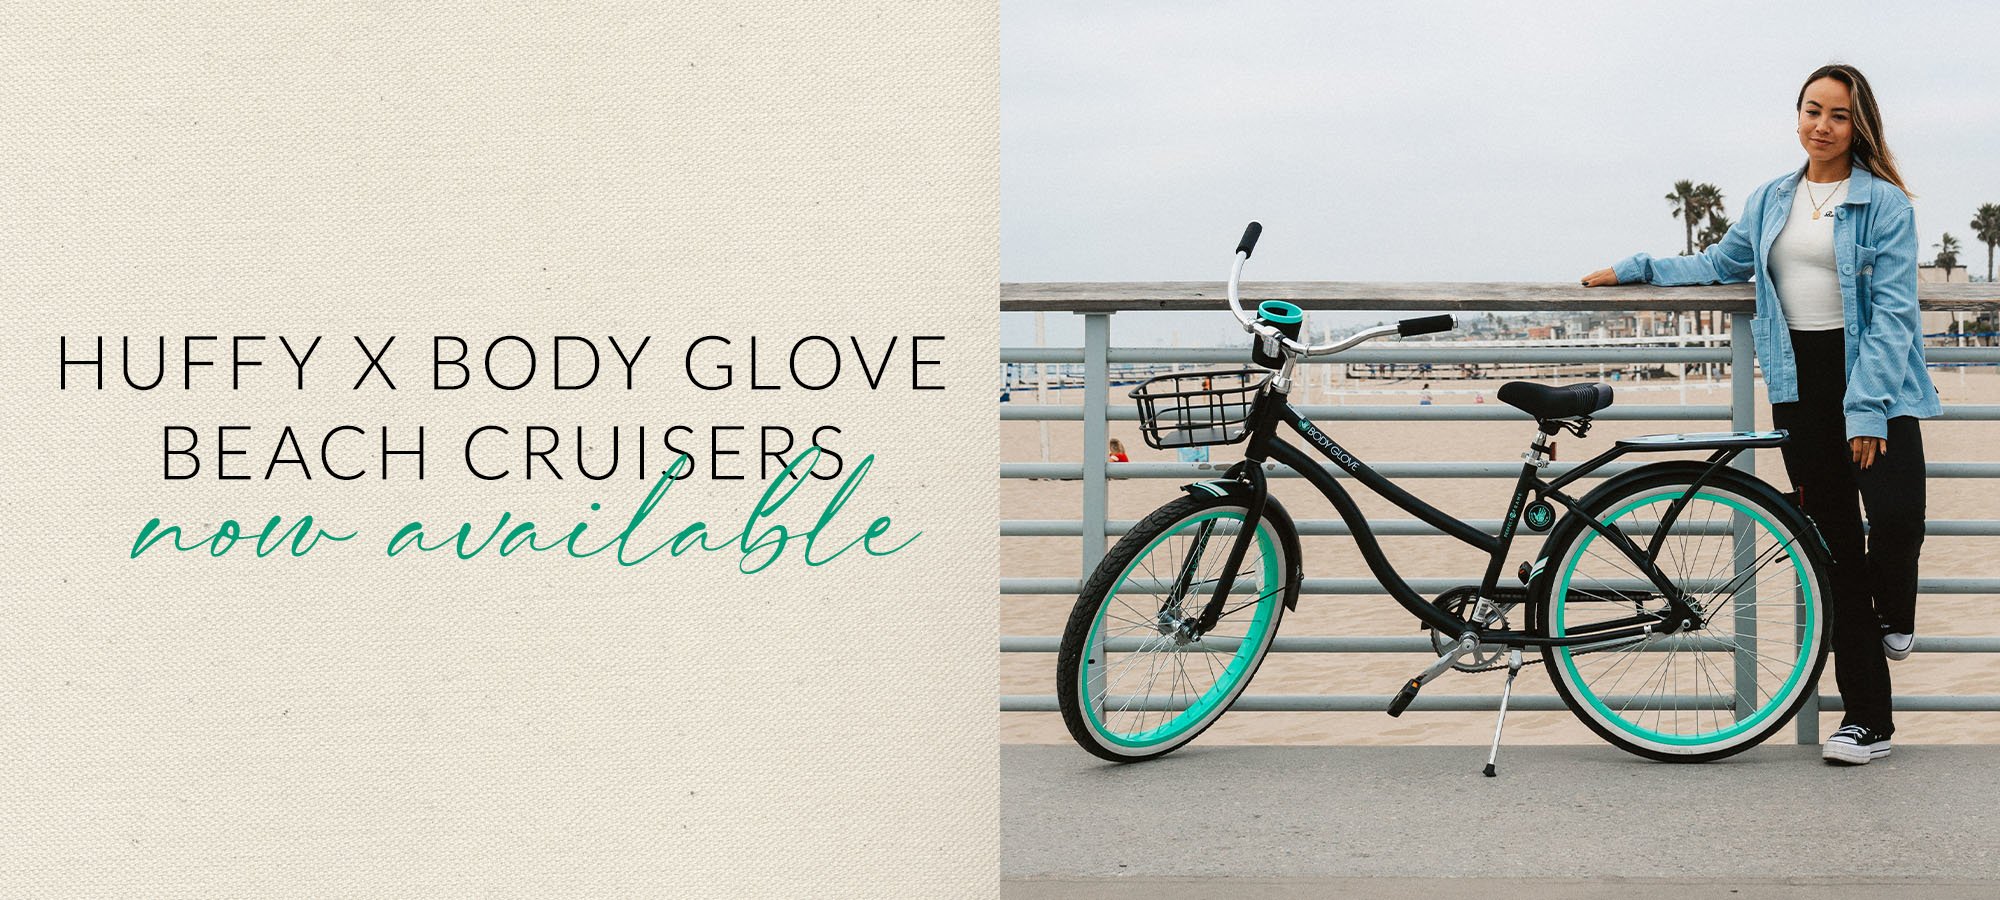 Huffy x Body Glove Beach Cruisers - now available - bike on a pier with a basket